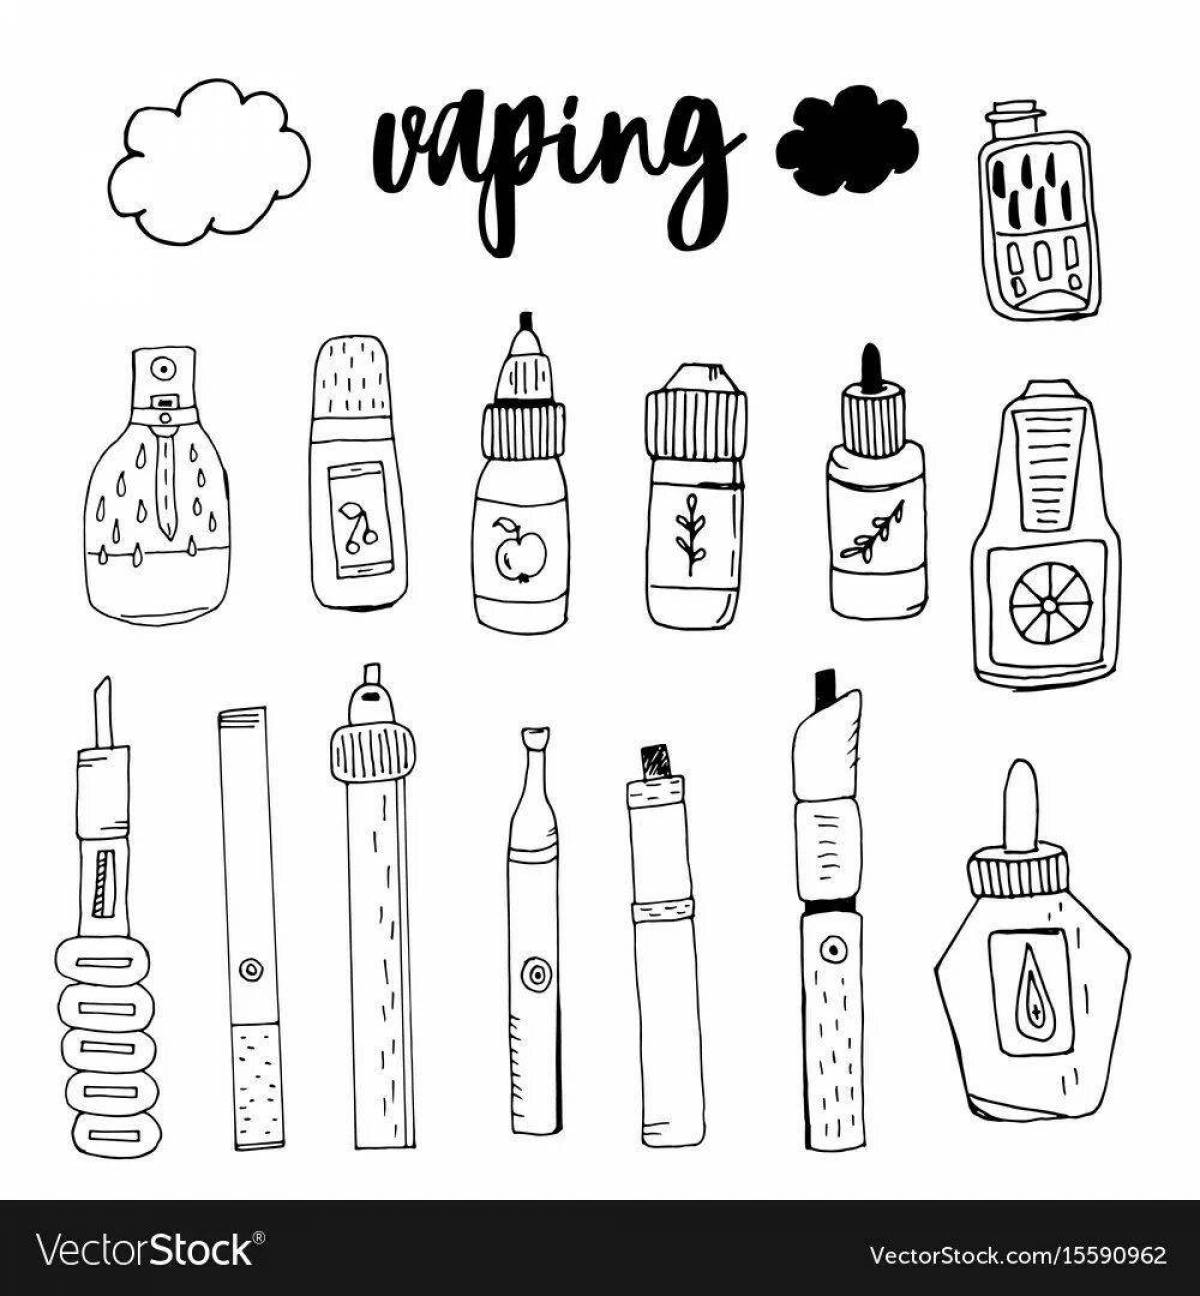 Coloured vape coloring page